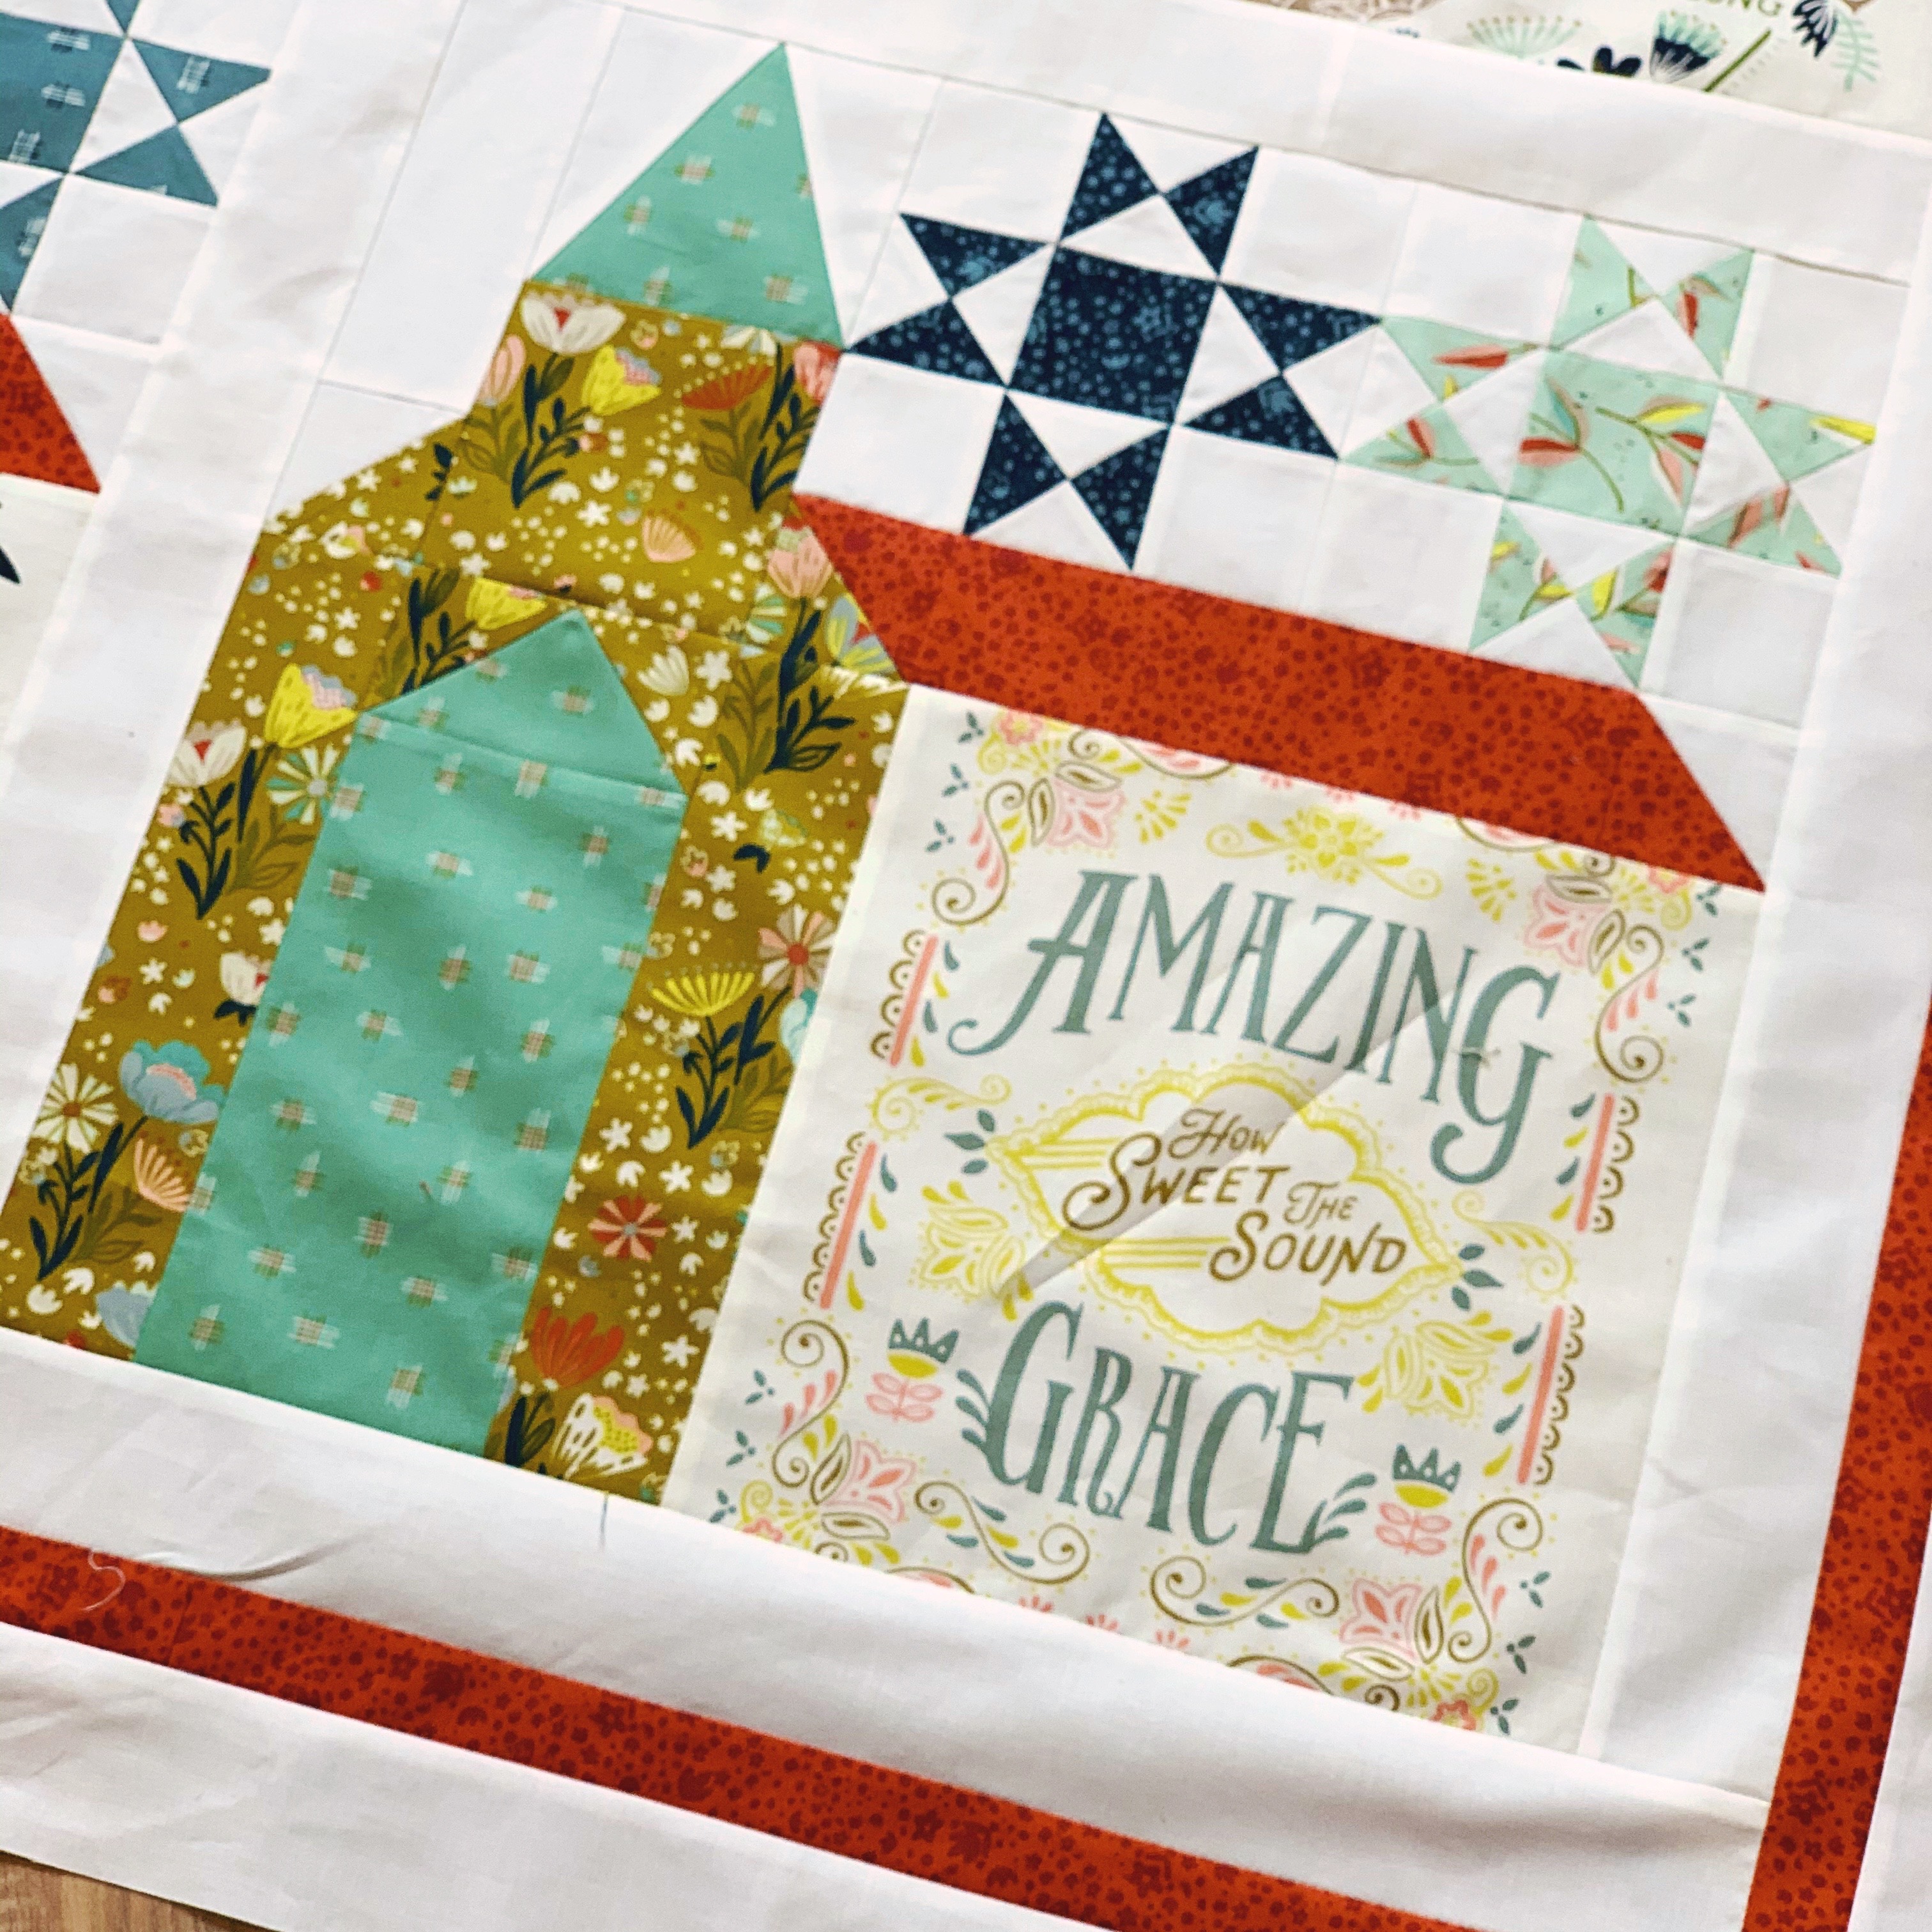 Coming SoonThe Firm Foundation Quilt! - My Wandering Path